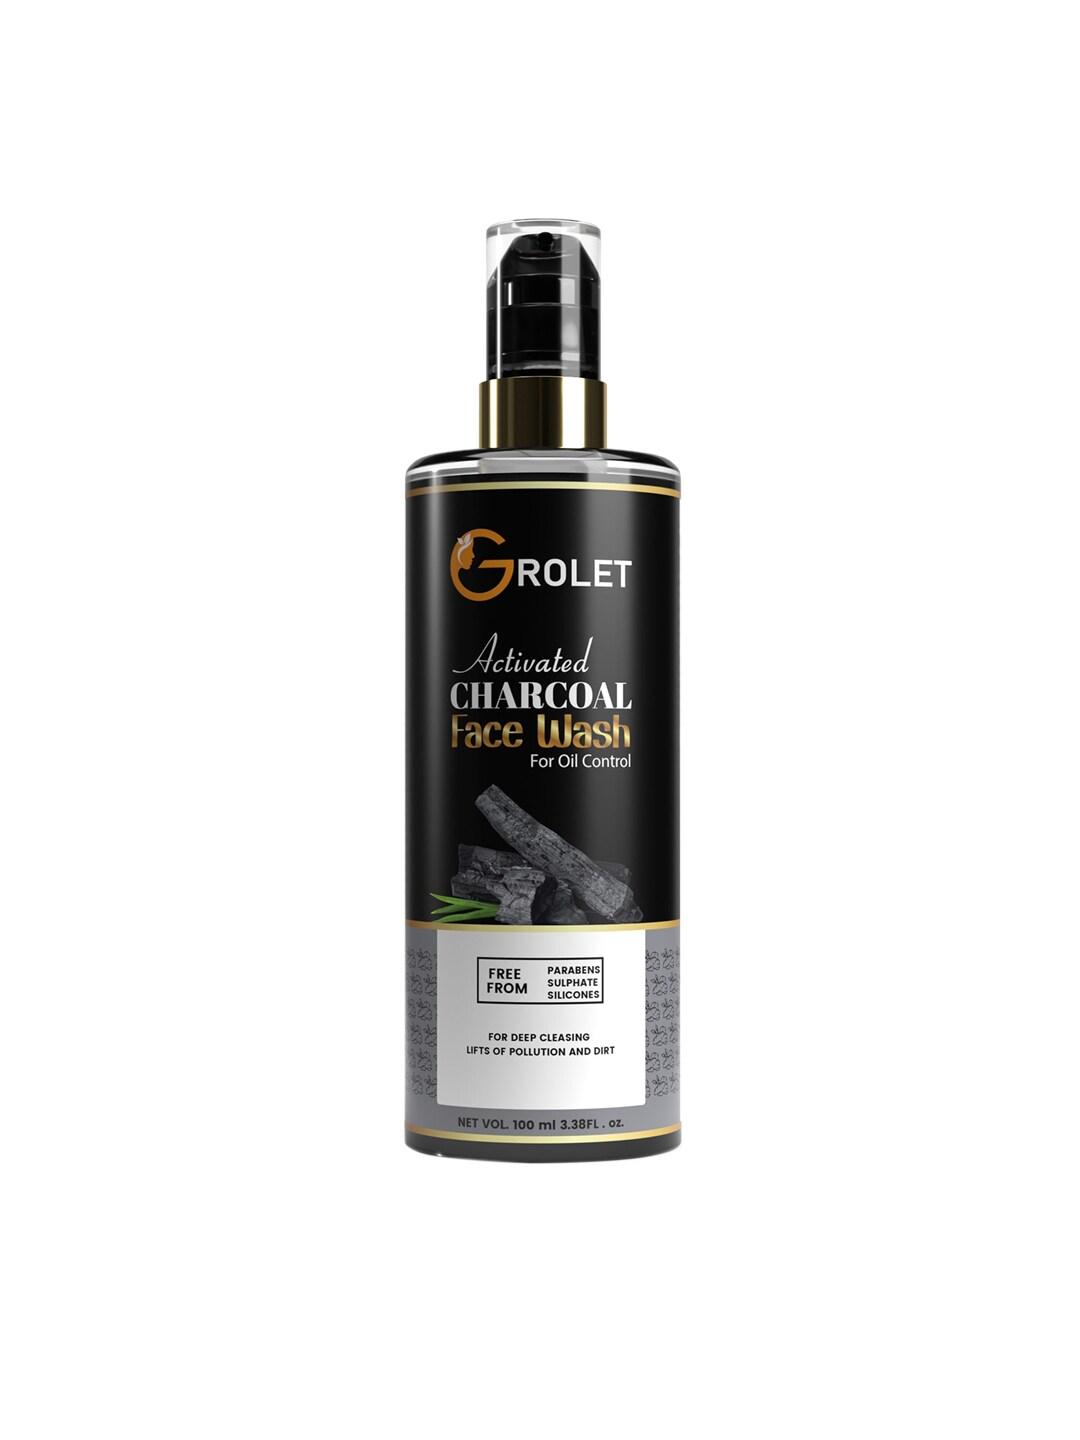 GROLET Activated Charcoal Face Wash for Oil Control - 100 ml